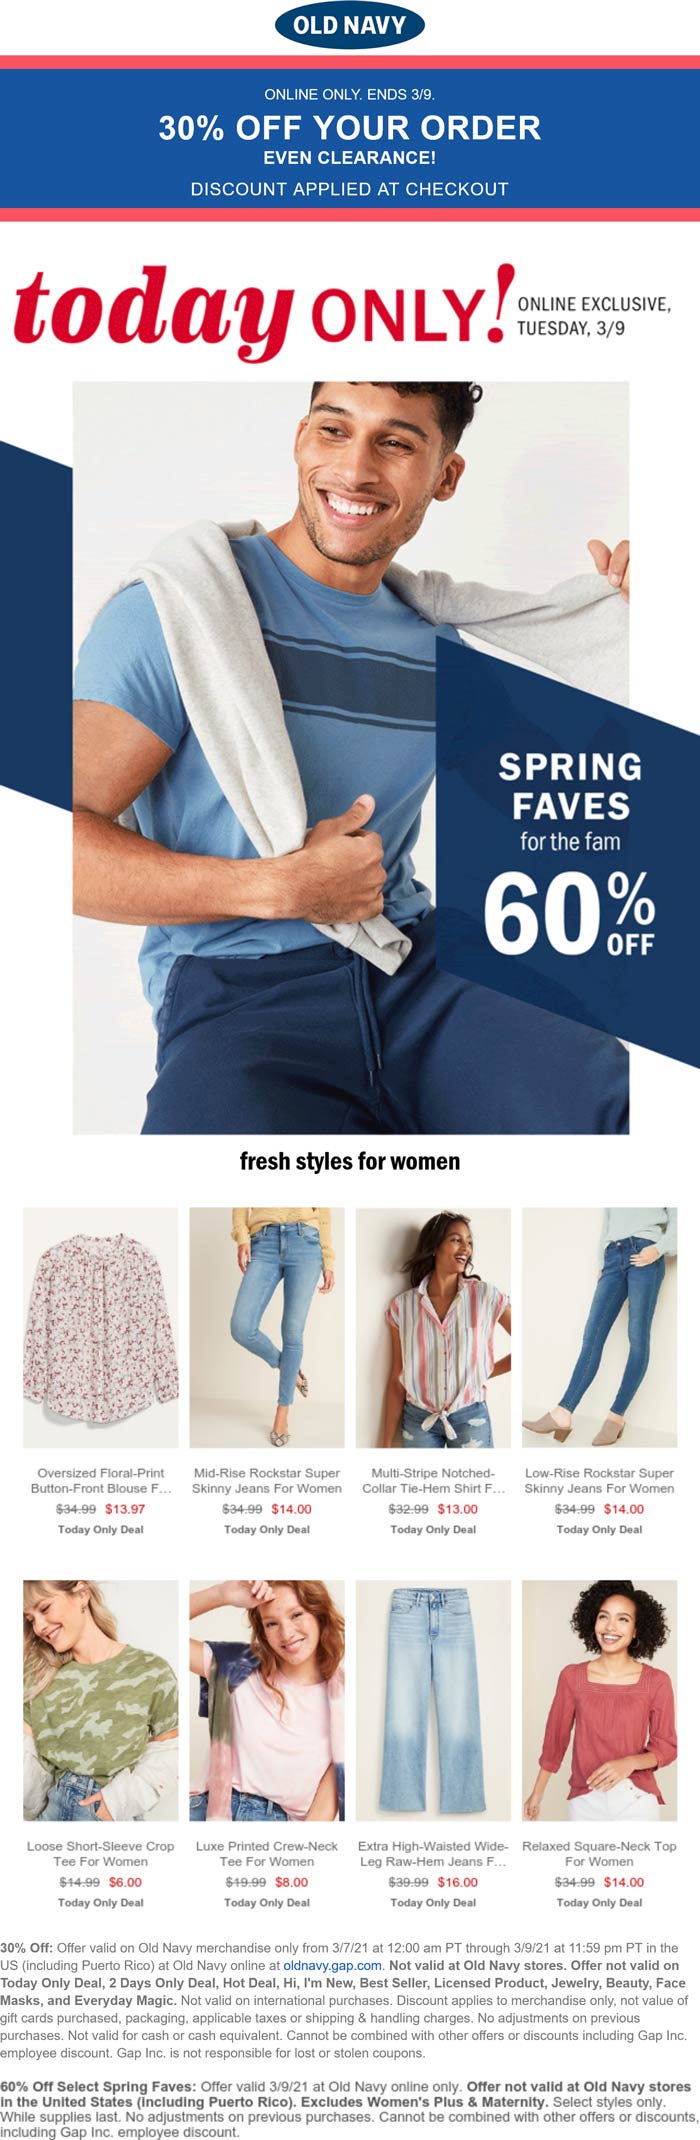 Old Navy stores Coupon  60% off Spring faves & 30% everything else online today at Old Navy #oldnavy 